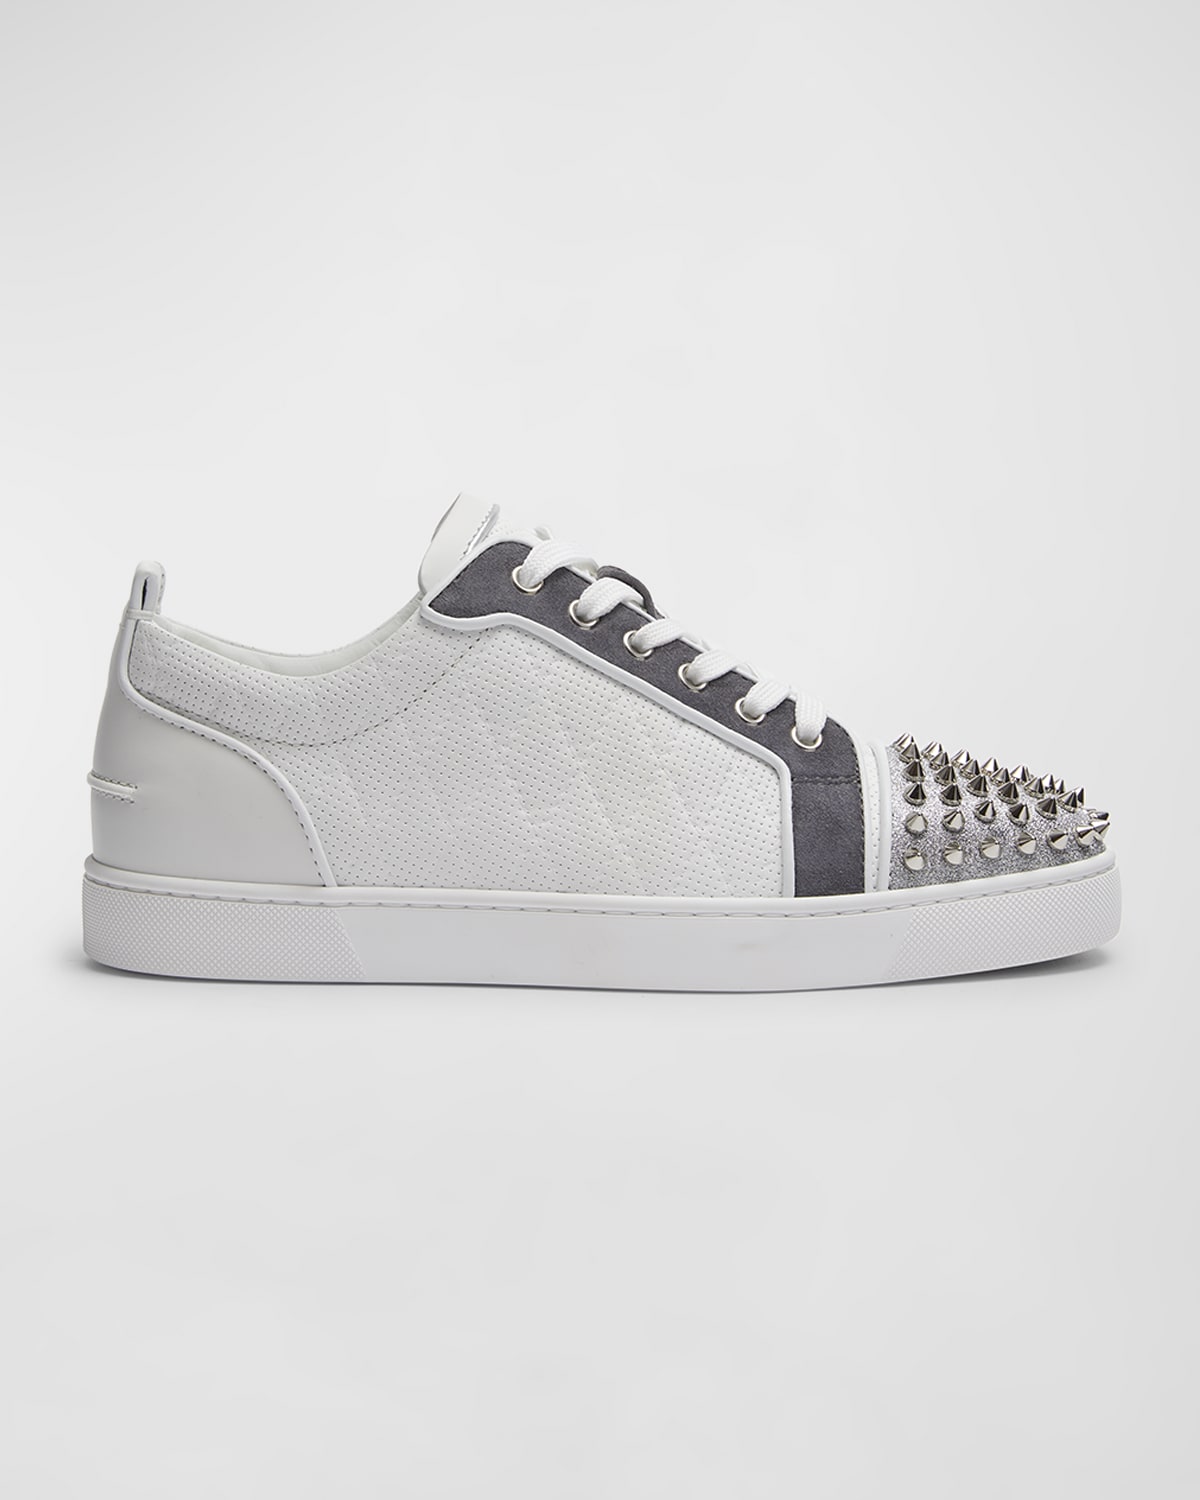 Christian Louboutin Men's Louis Junior Spikes Leather Sneakers